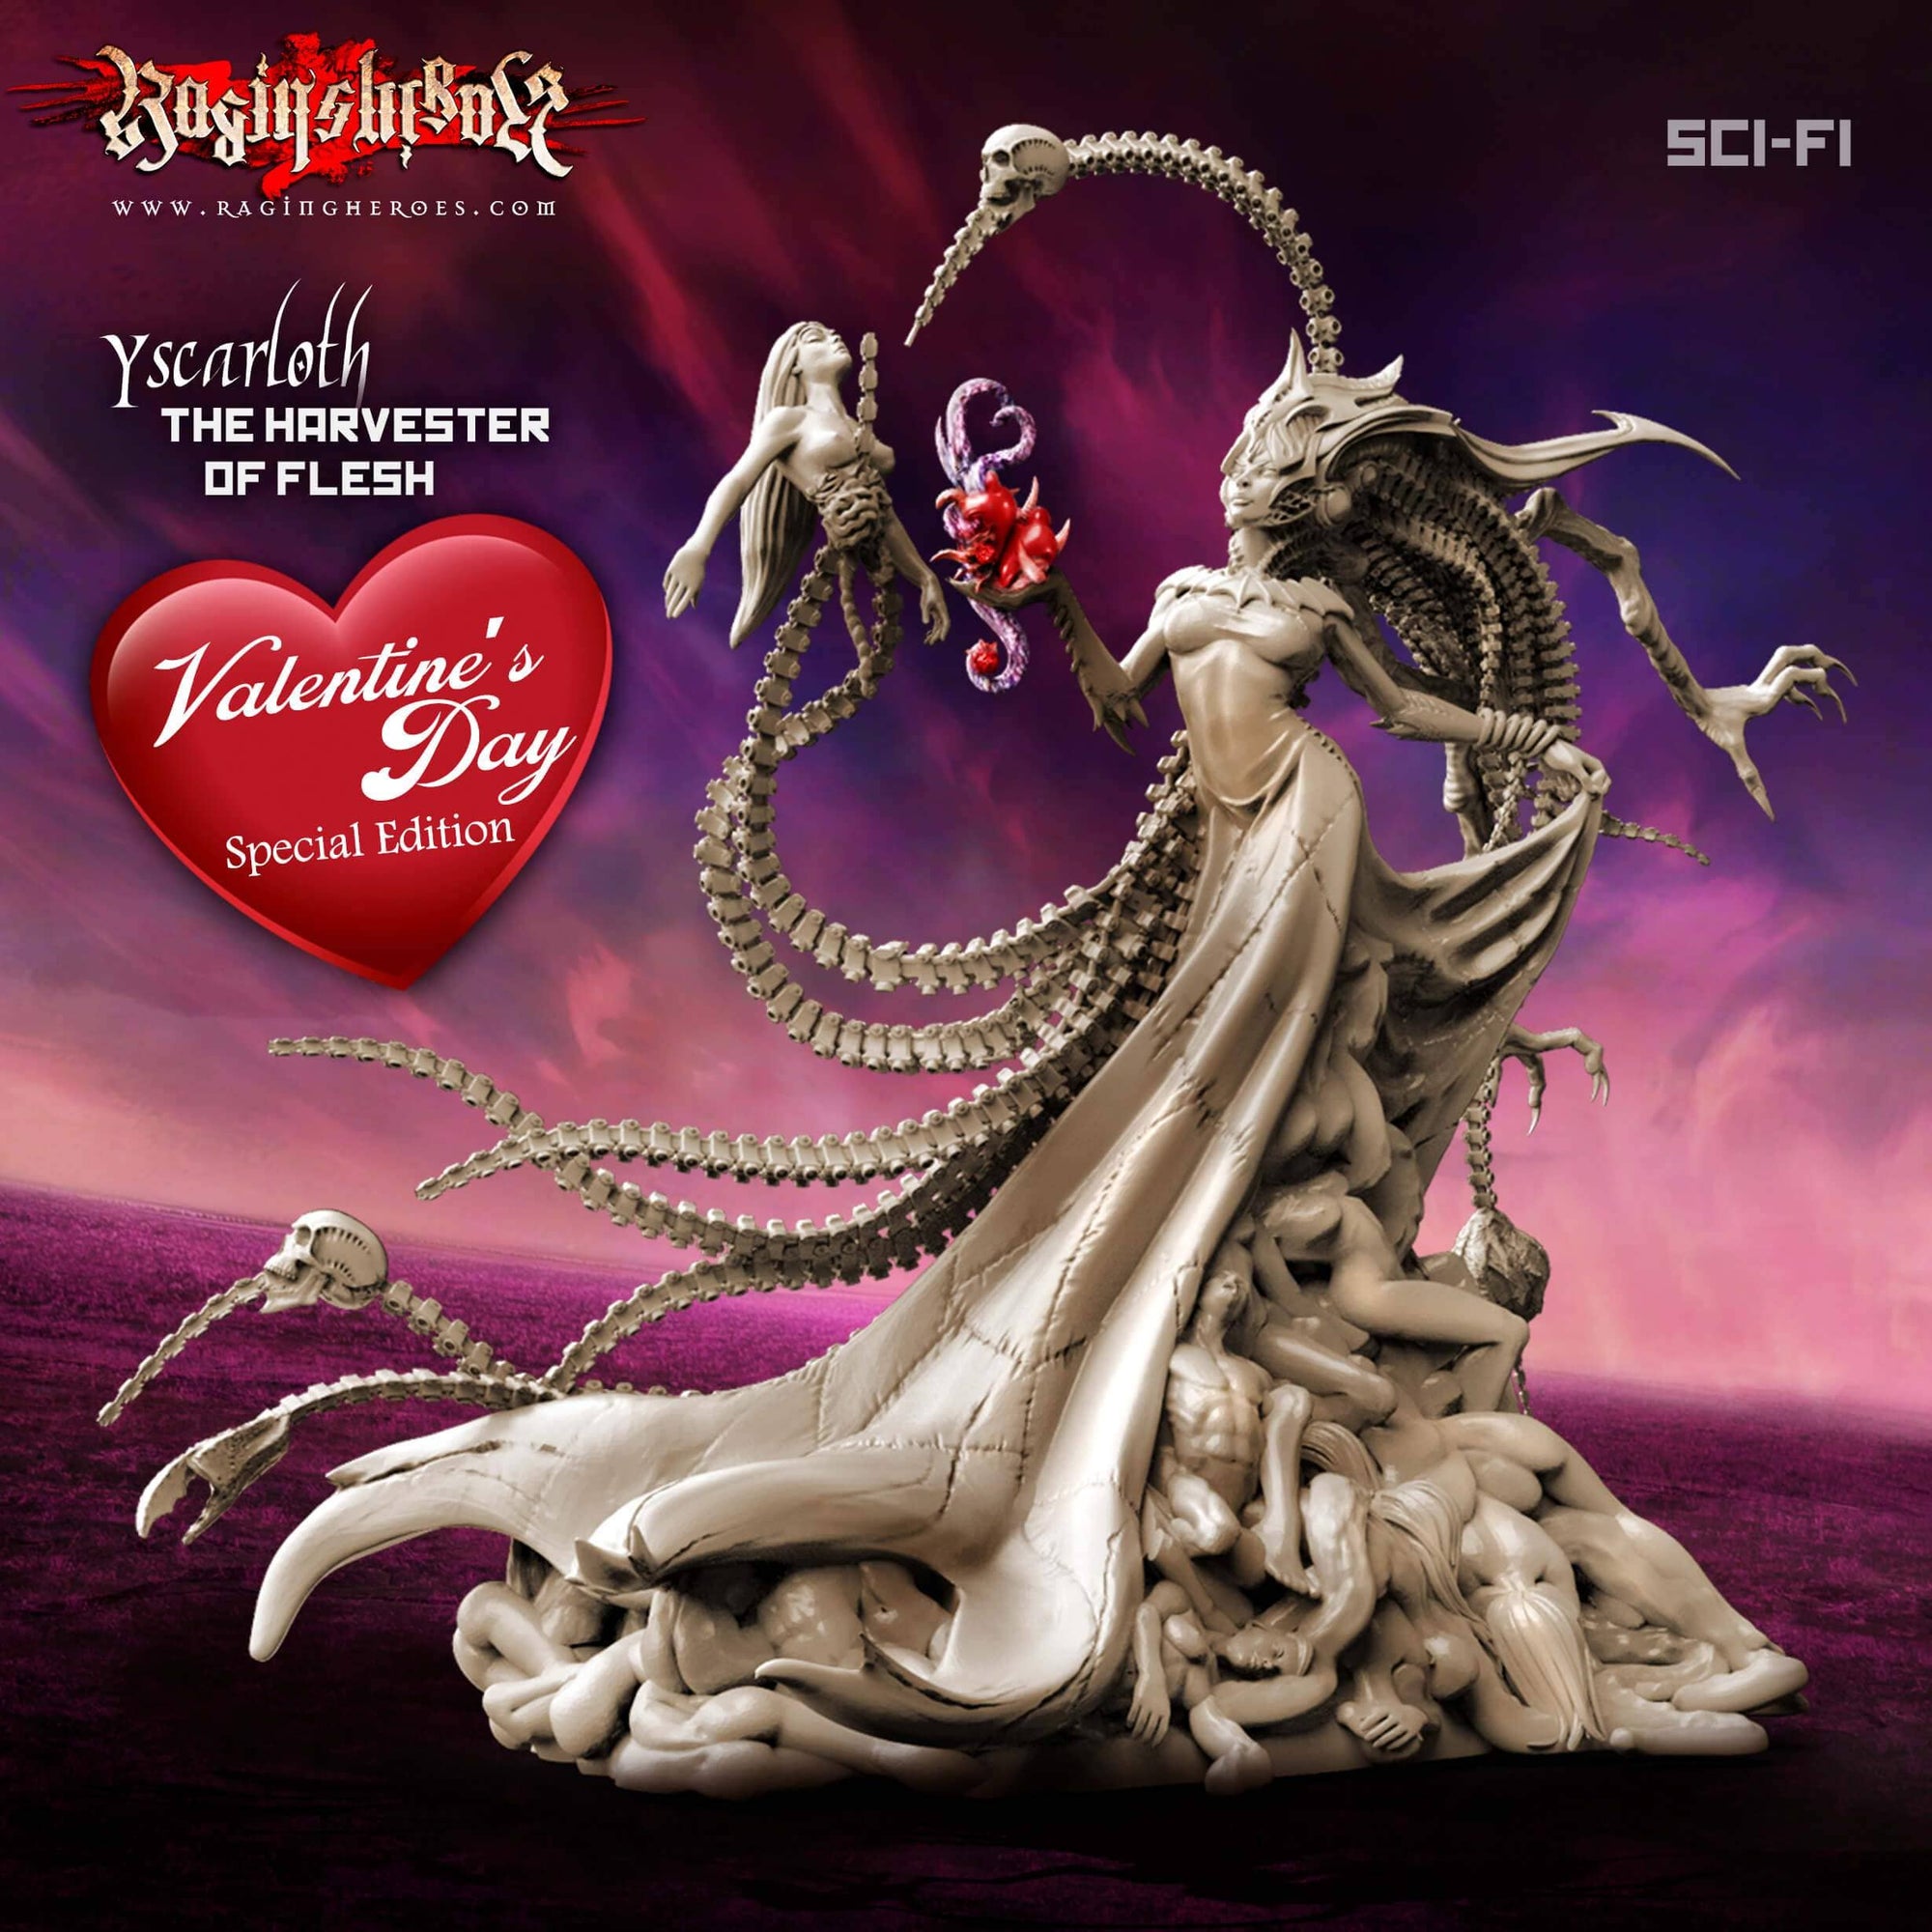 Yscarloth, The Harvester of Flesh, Valentine's Day Special Edition Sci -Fi Version (LE - SF)